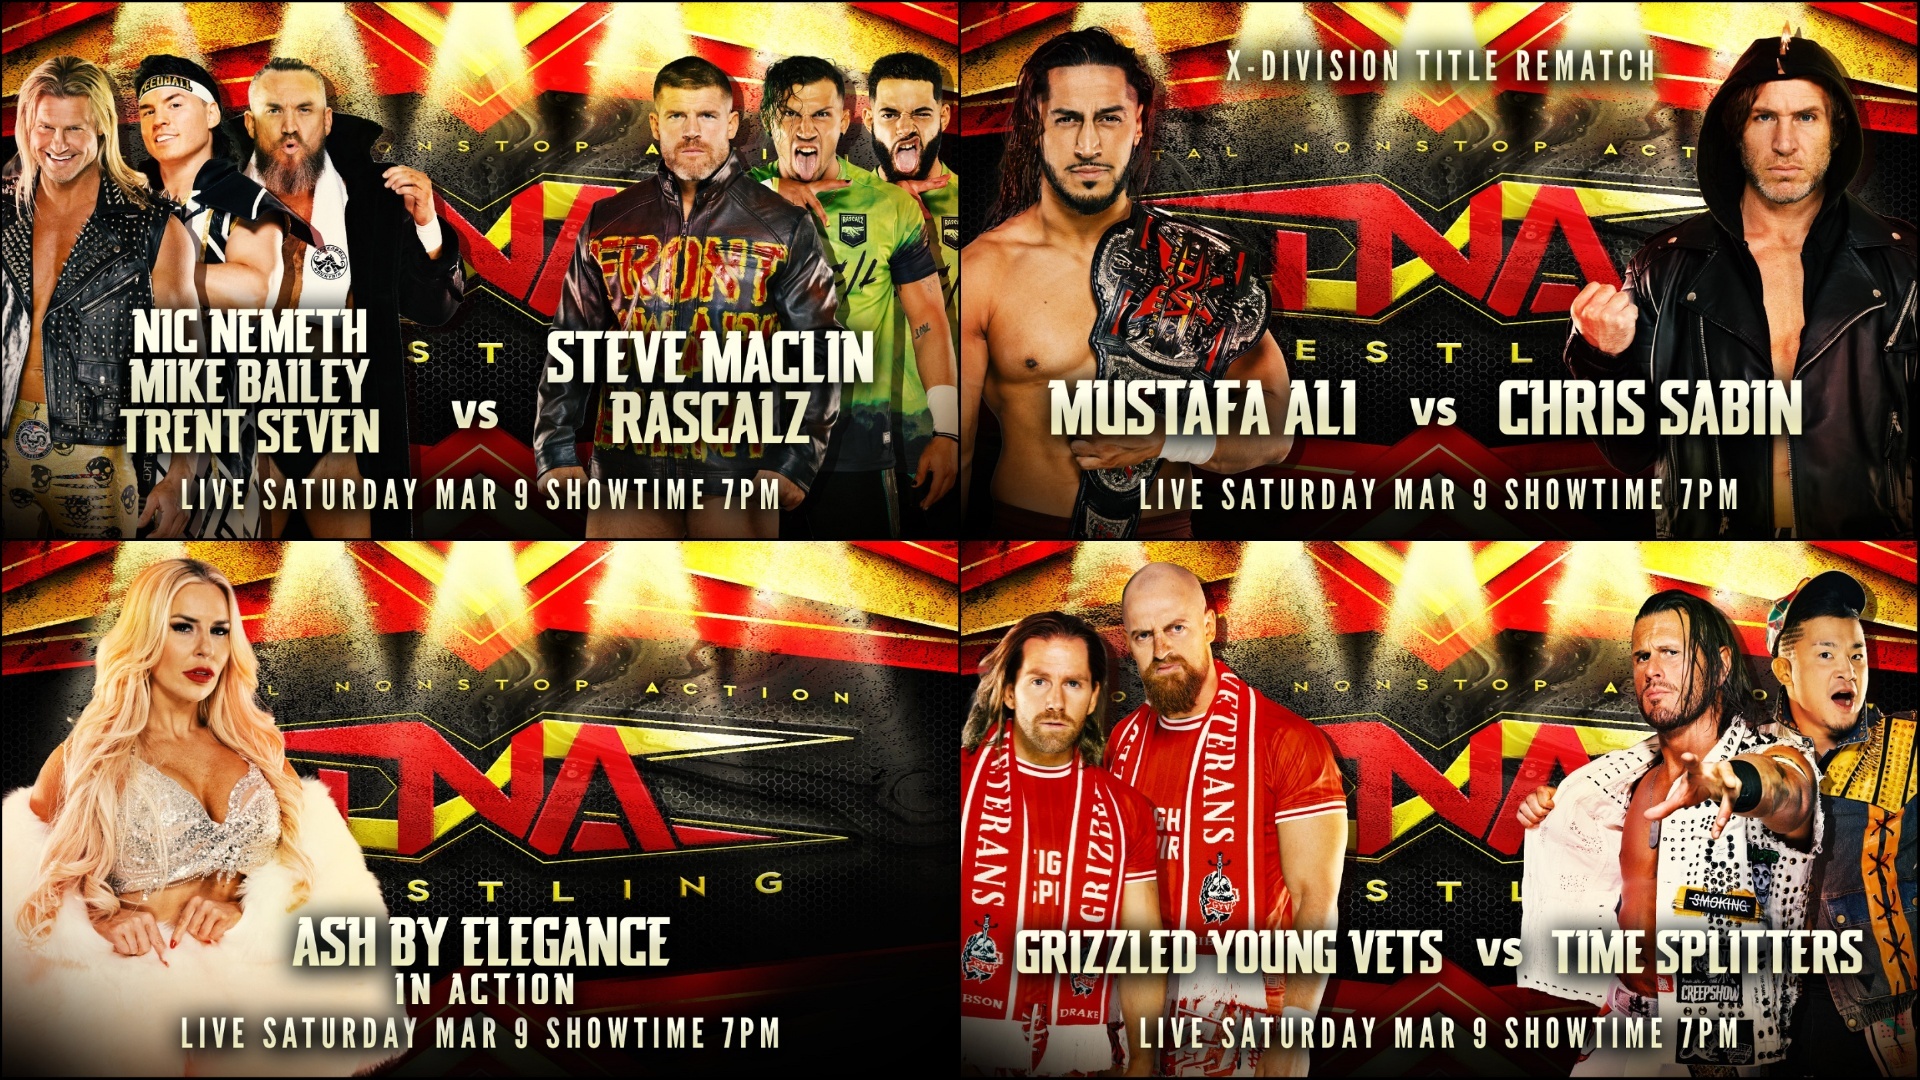 Windsor! The Action Continues This Saturday as TNA Wrestling Presents iMPACT! – TNA Wrestling